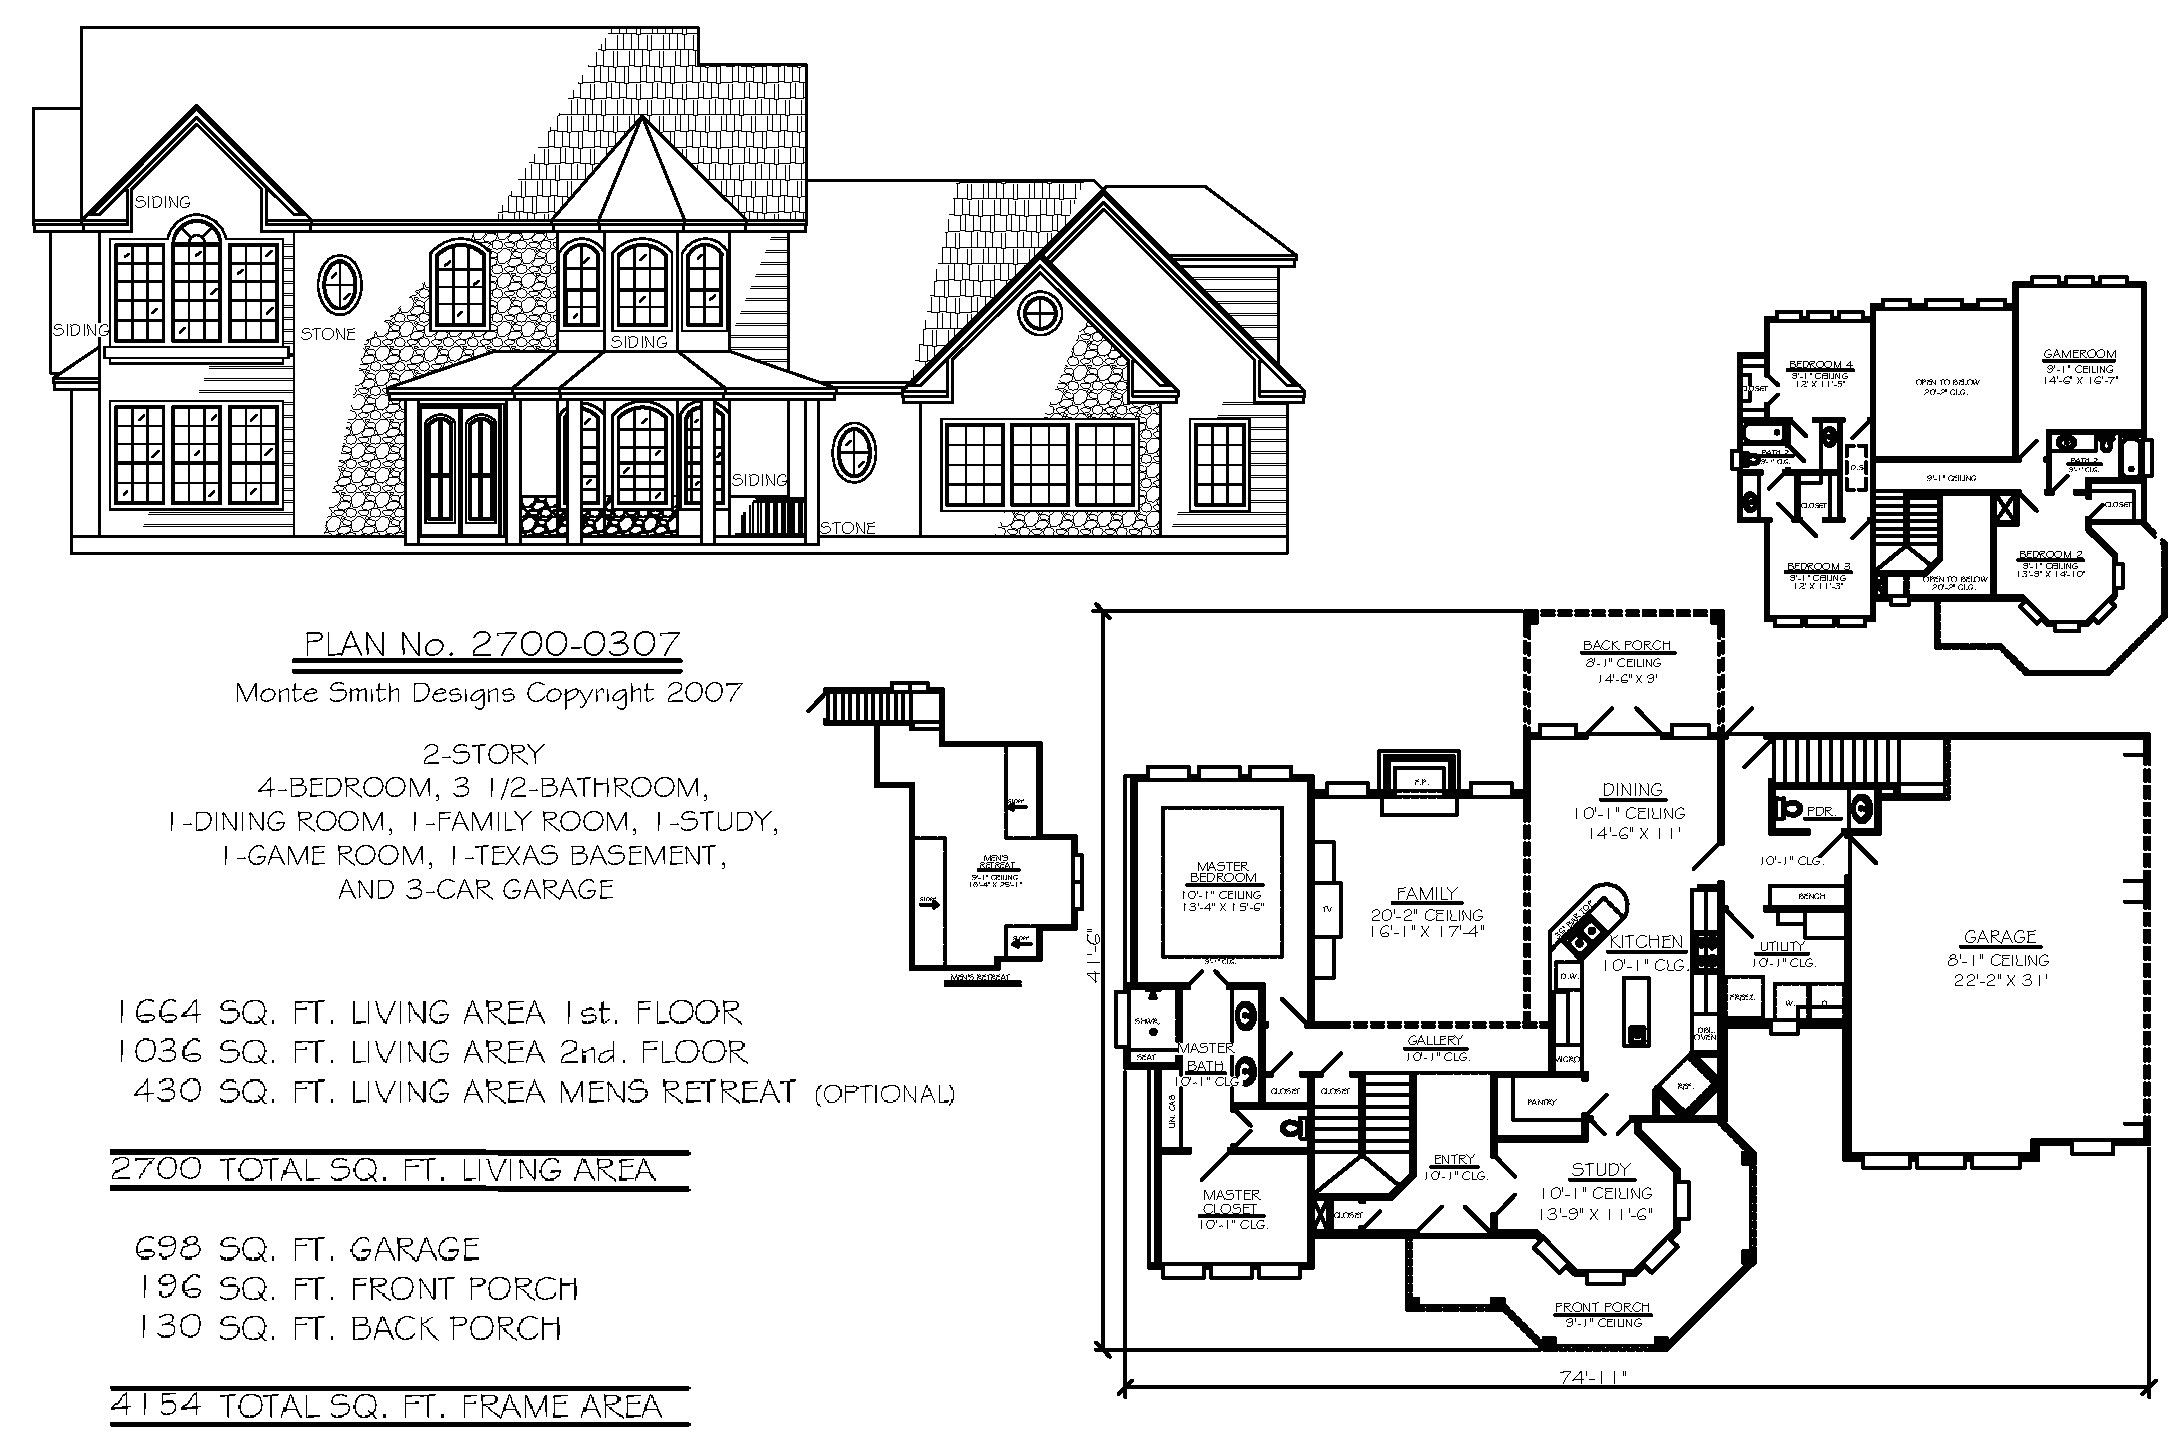 2500 sq ft house plans with walkout basement fresh luxury ranch house plans lovely manor heart 10 high end elegant home